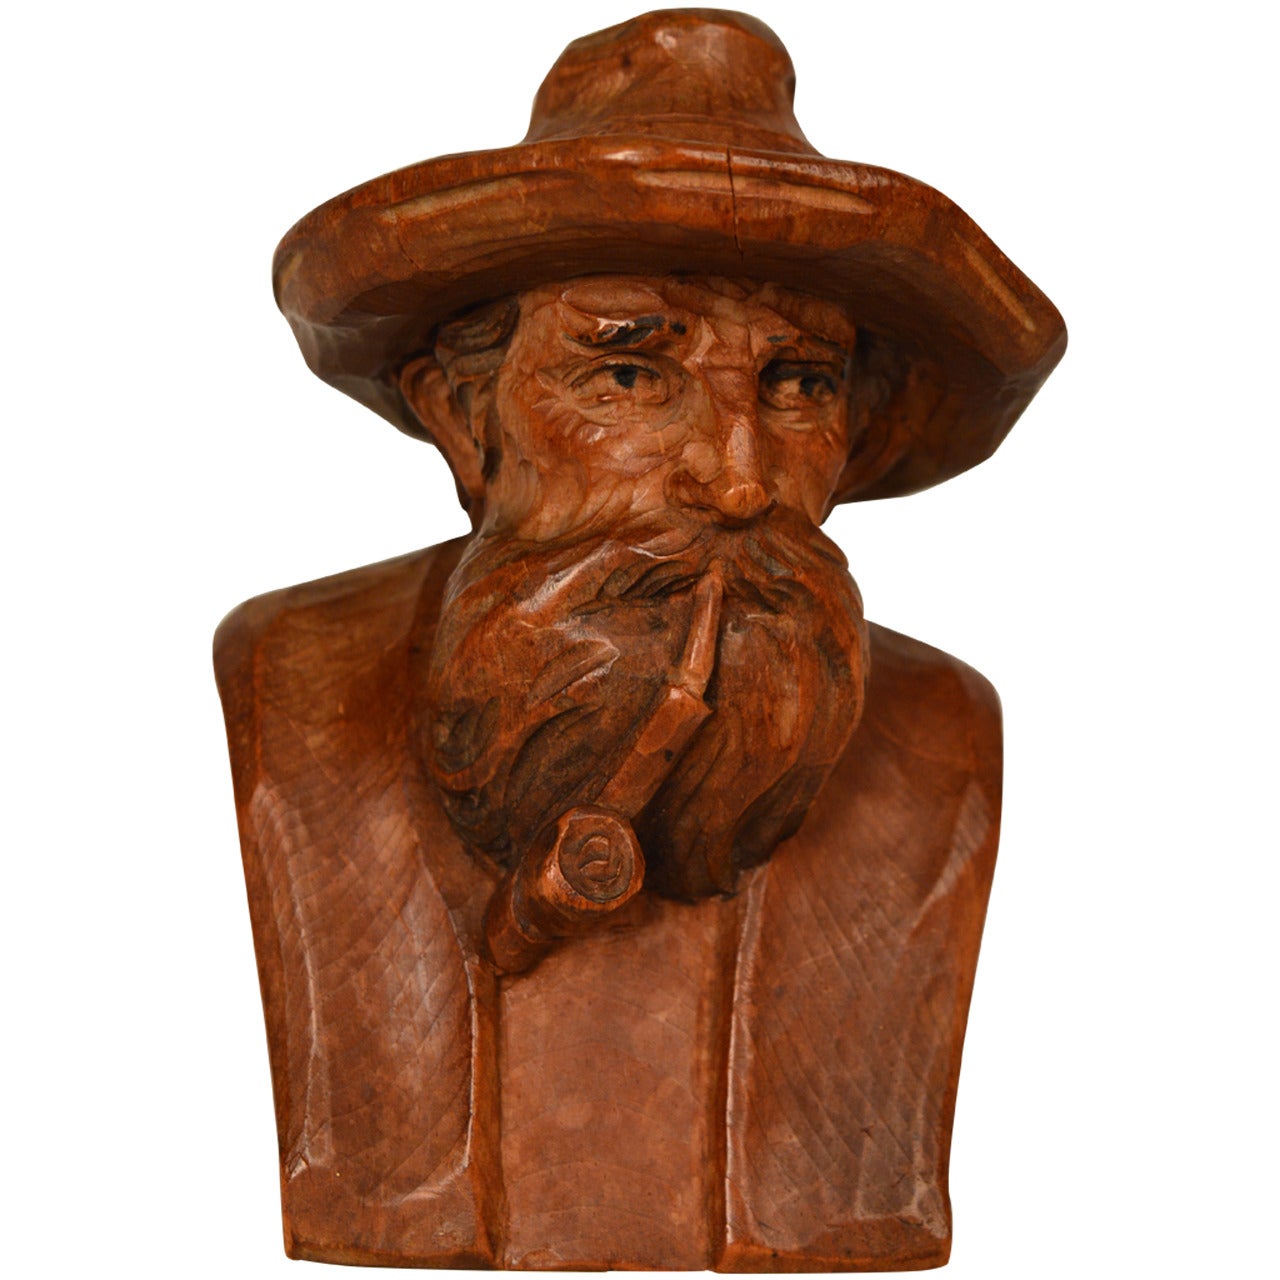 Circa 1930 Continental carved wood bust of a man